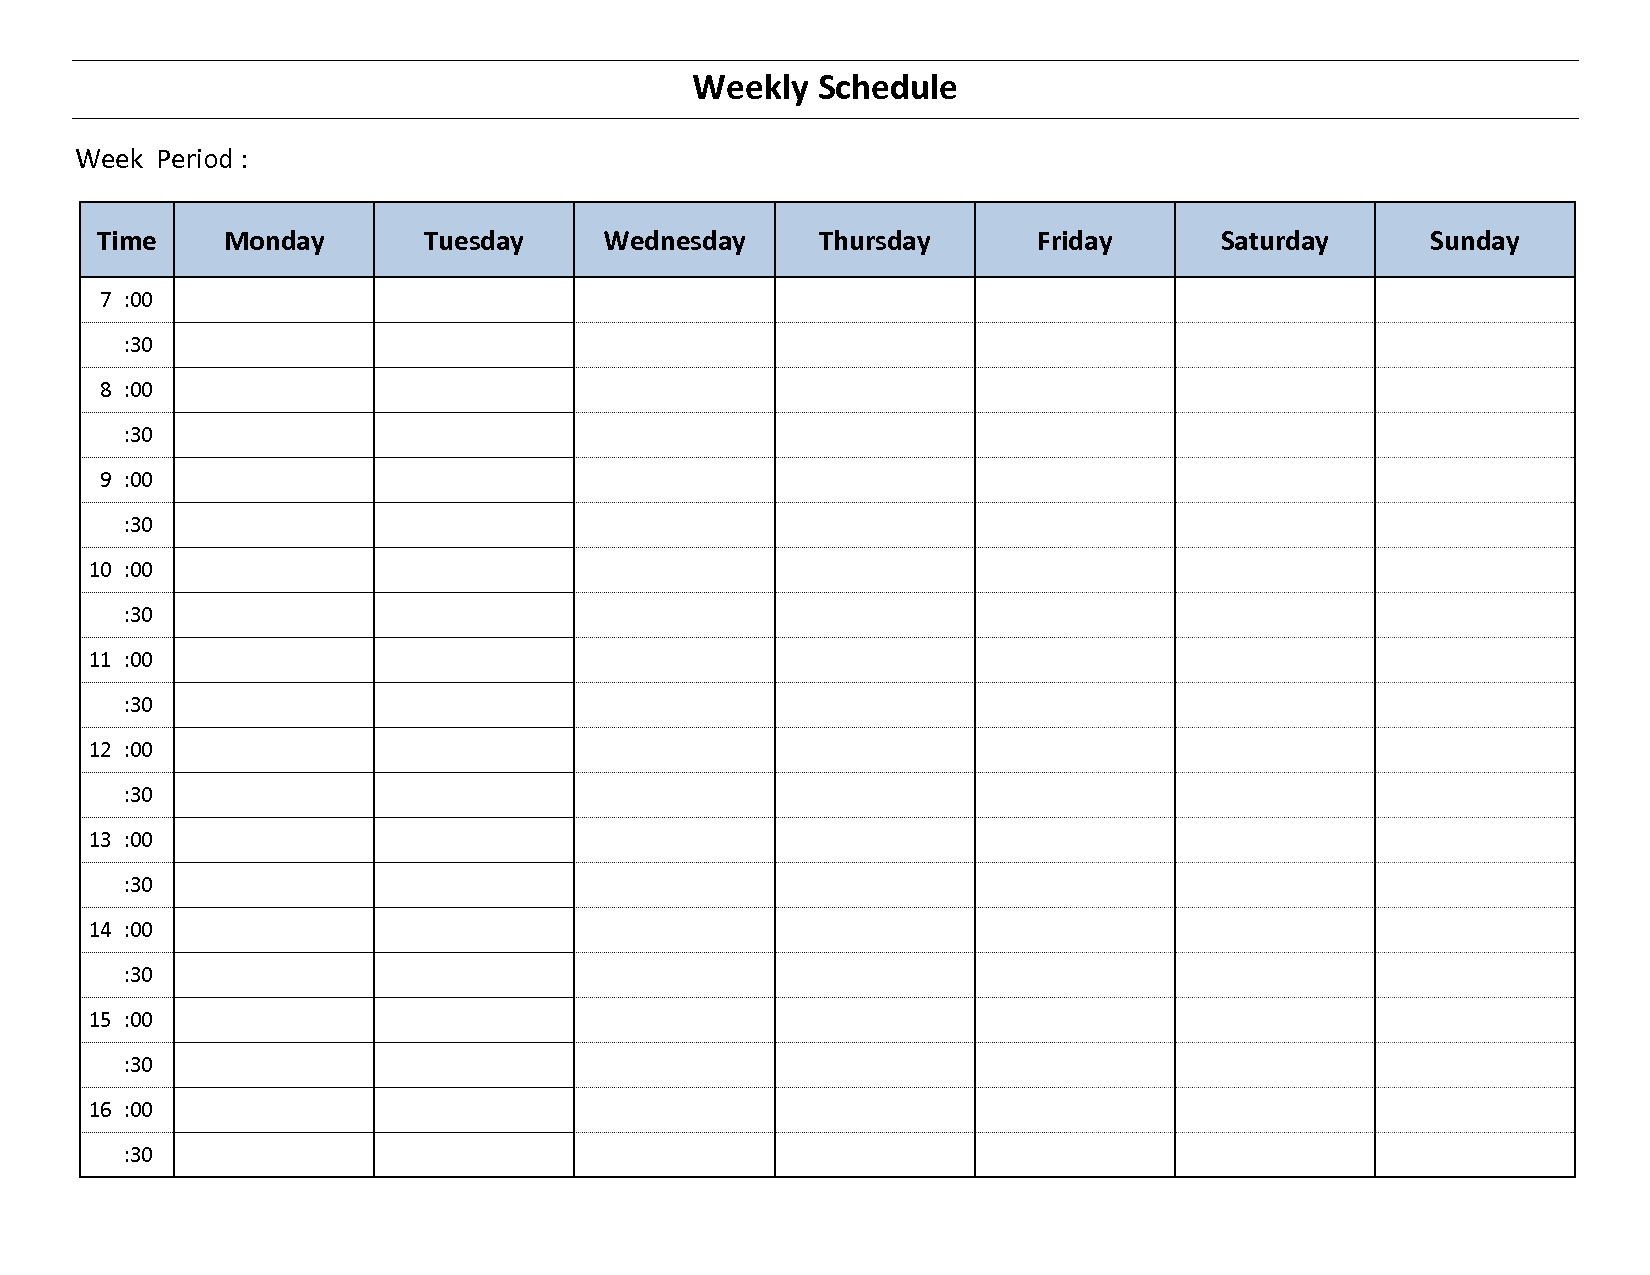 Construction Schedule Template Excel Free Download | Weekly